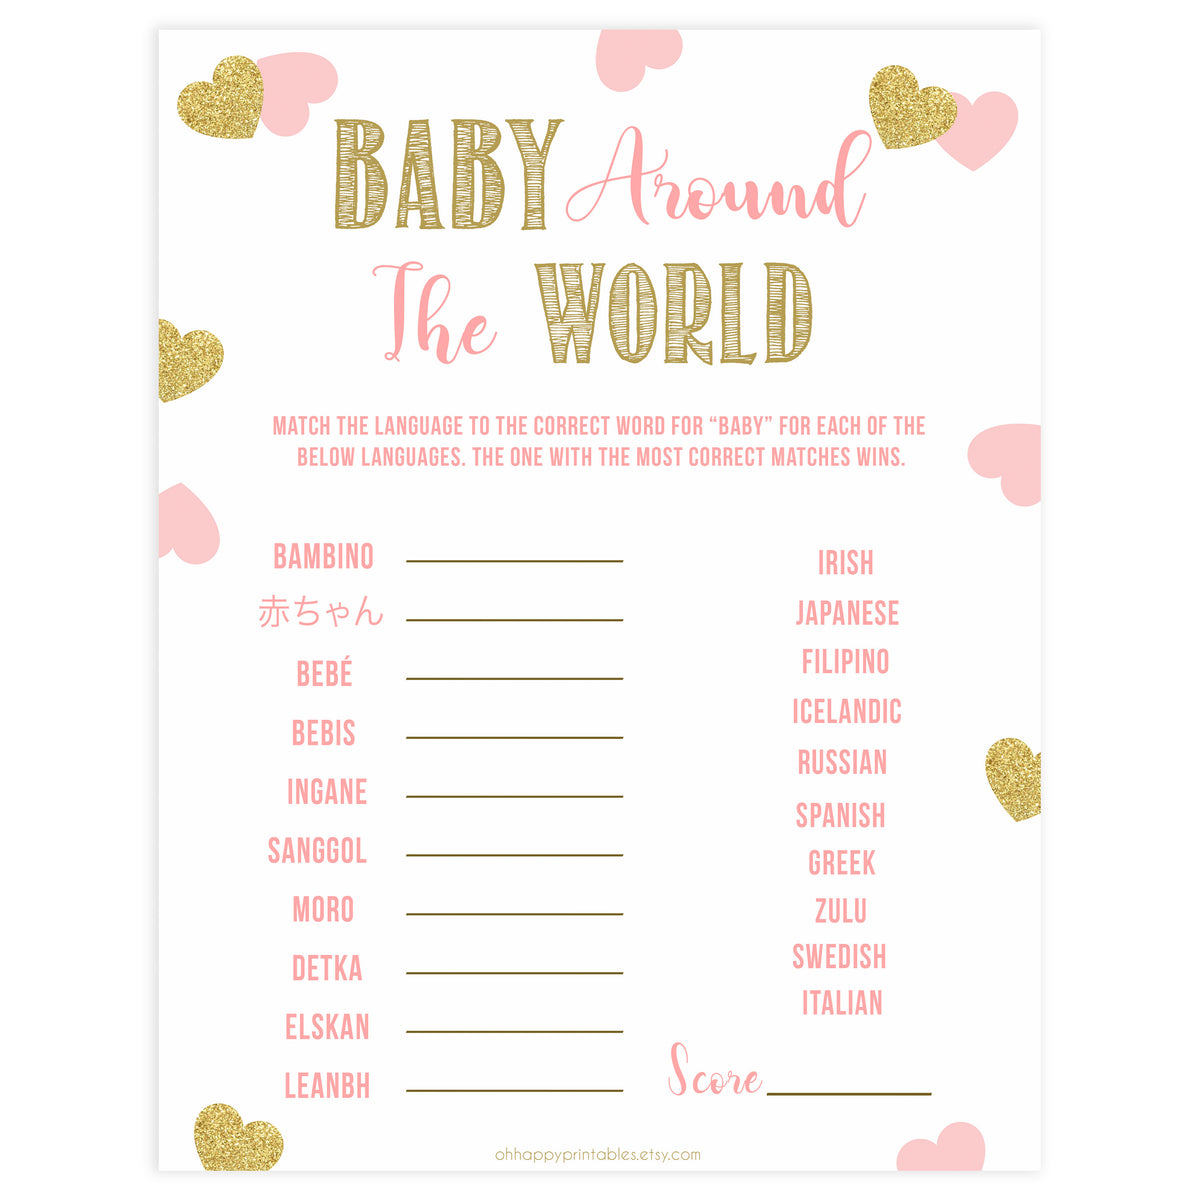 baby around the world game, Printable baby shower games, large pink hearts fun baby games, baby shower games, fun baby shower ideas, top baby shower ideas, gold pink hearts shower baby shower, pink hearts baby shower ideas